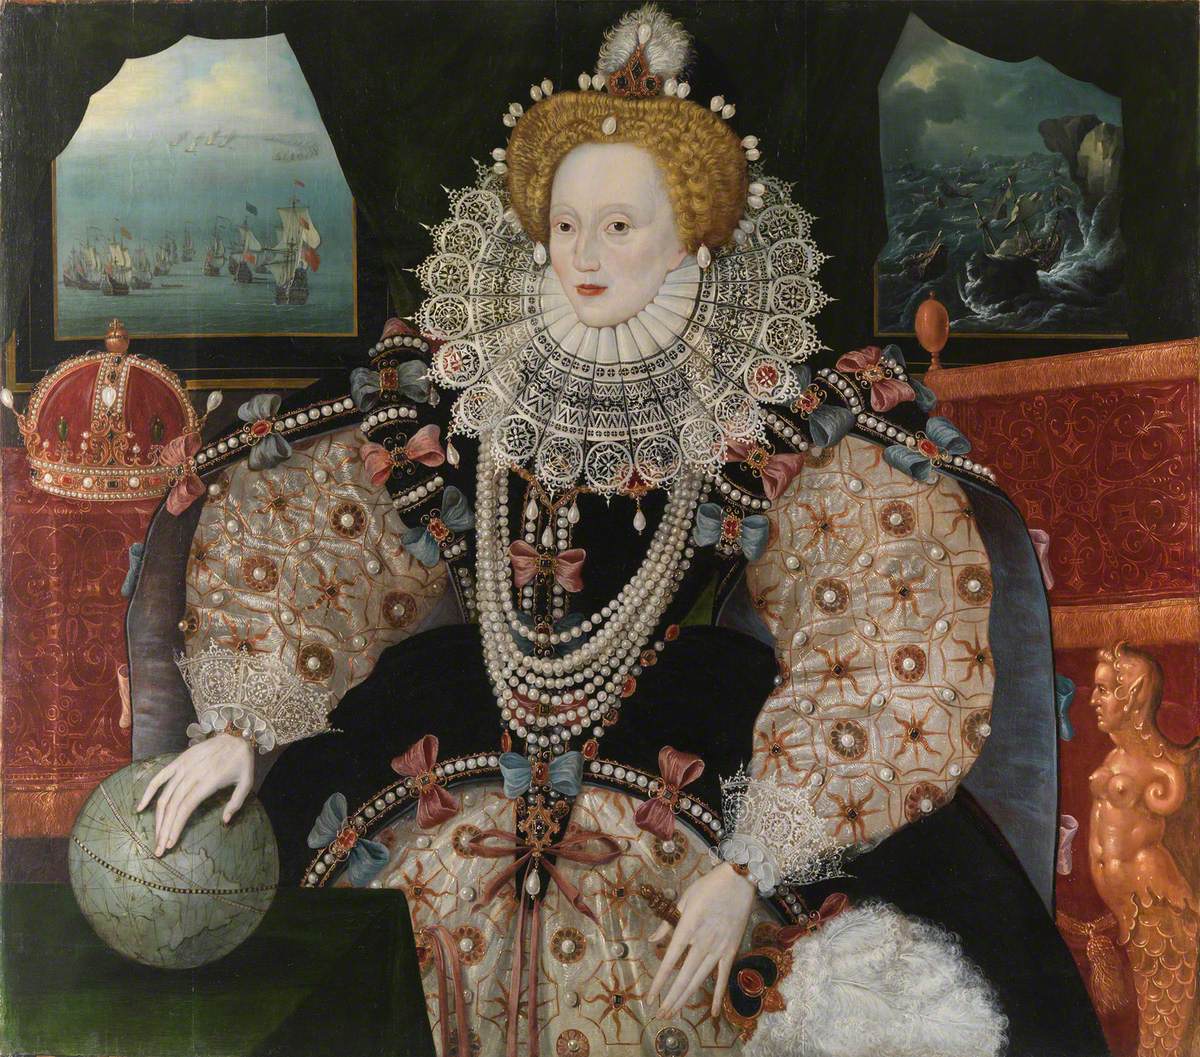 A painting of queen Elizabeth I in very elaborate attire, with her right hand resting on a globe. A fleet of ships is seen through a window, in the distance.